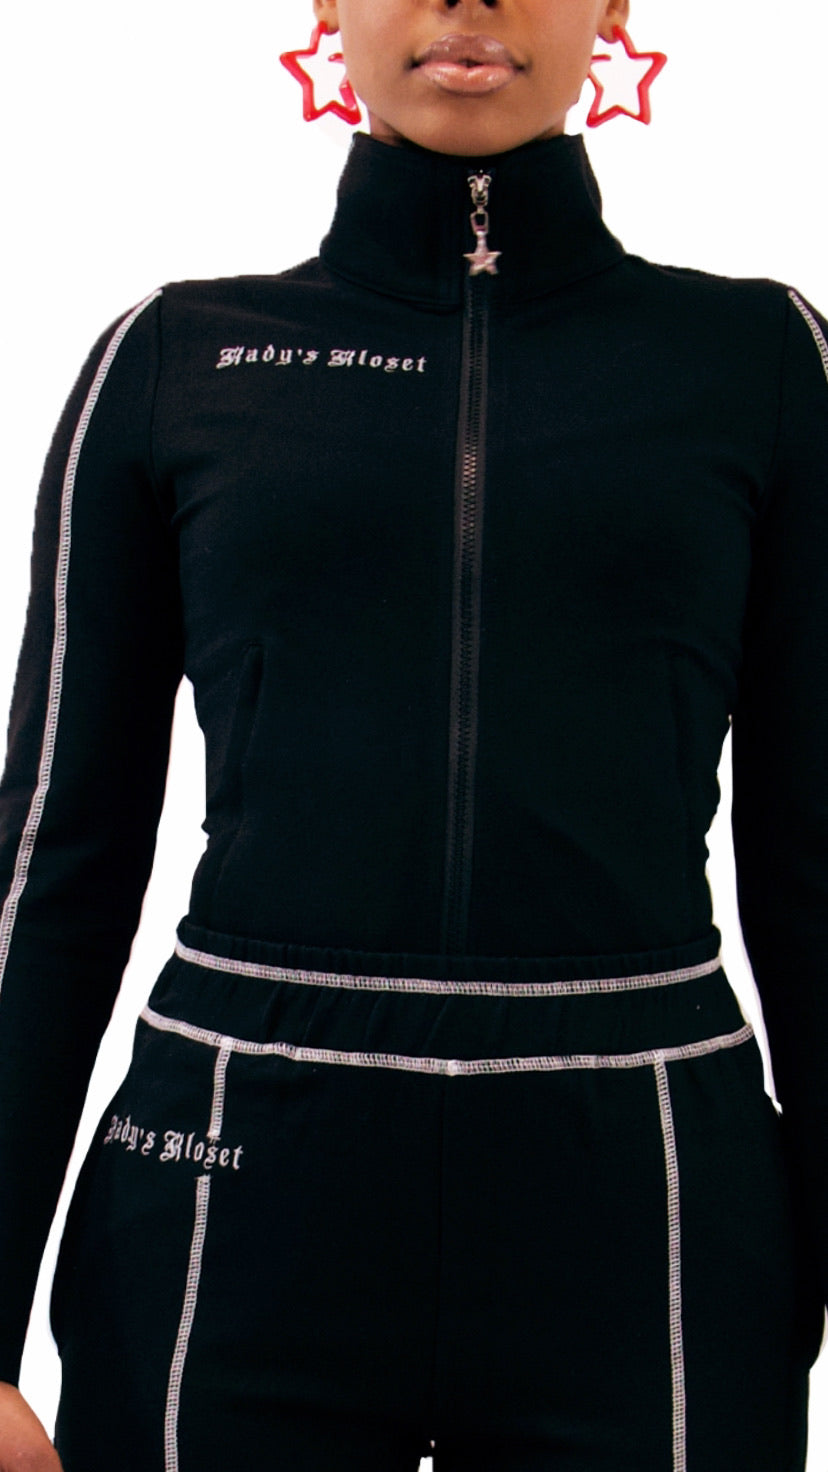 Track Star Suit: Best-Selling Athleisure